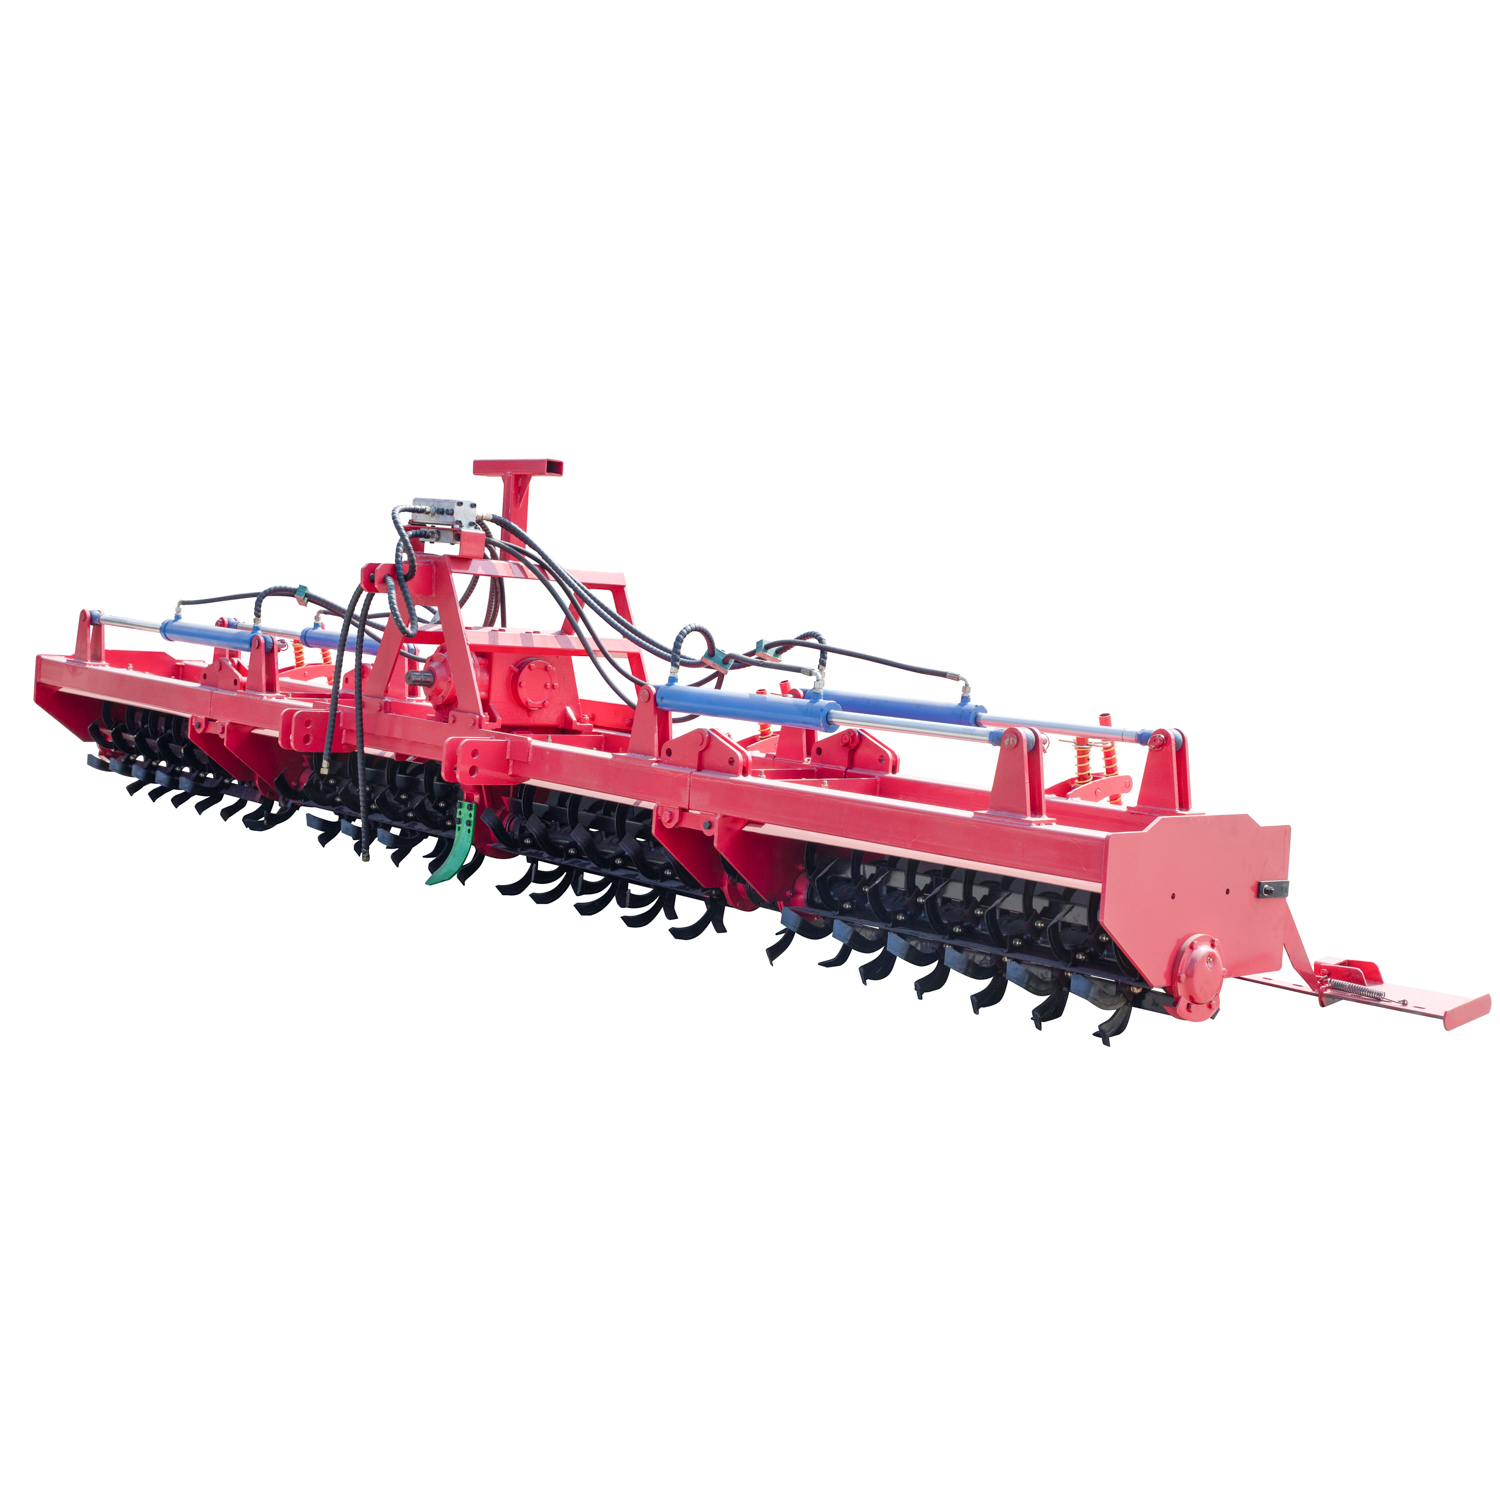 Coordination of Rotary Tiller and Tractor